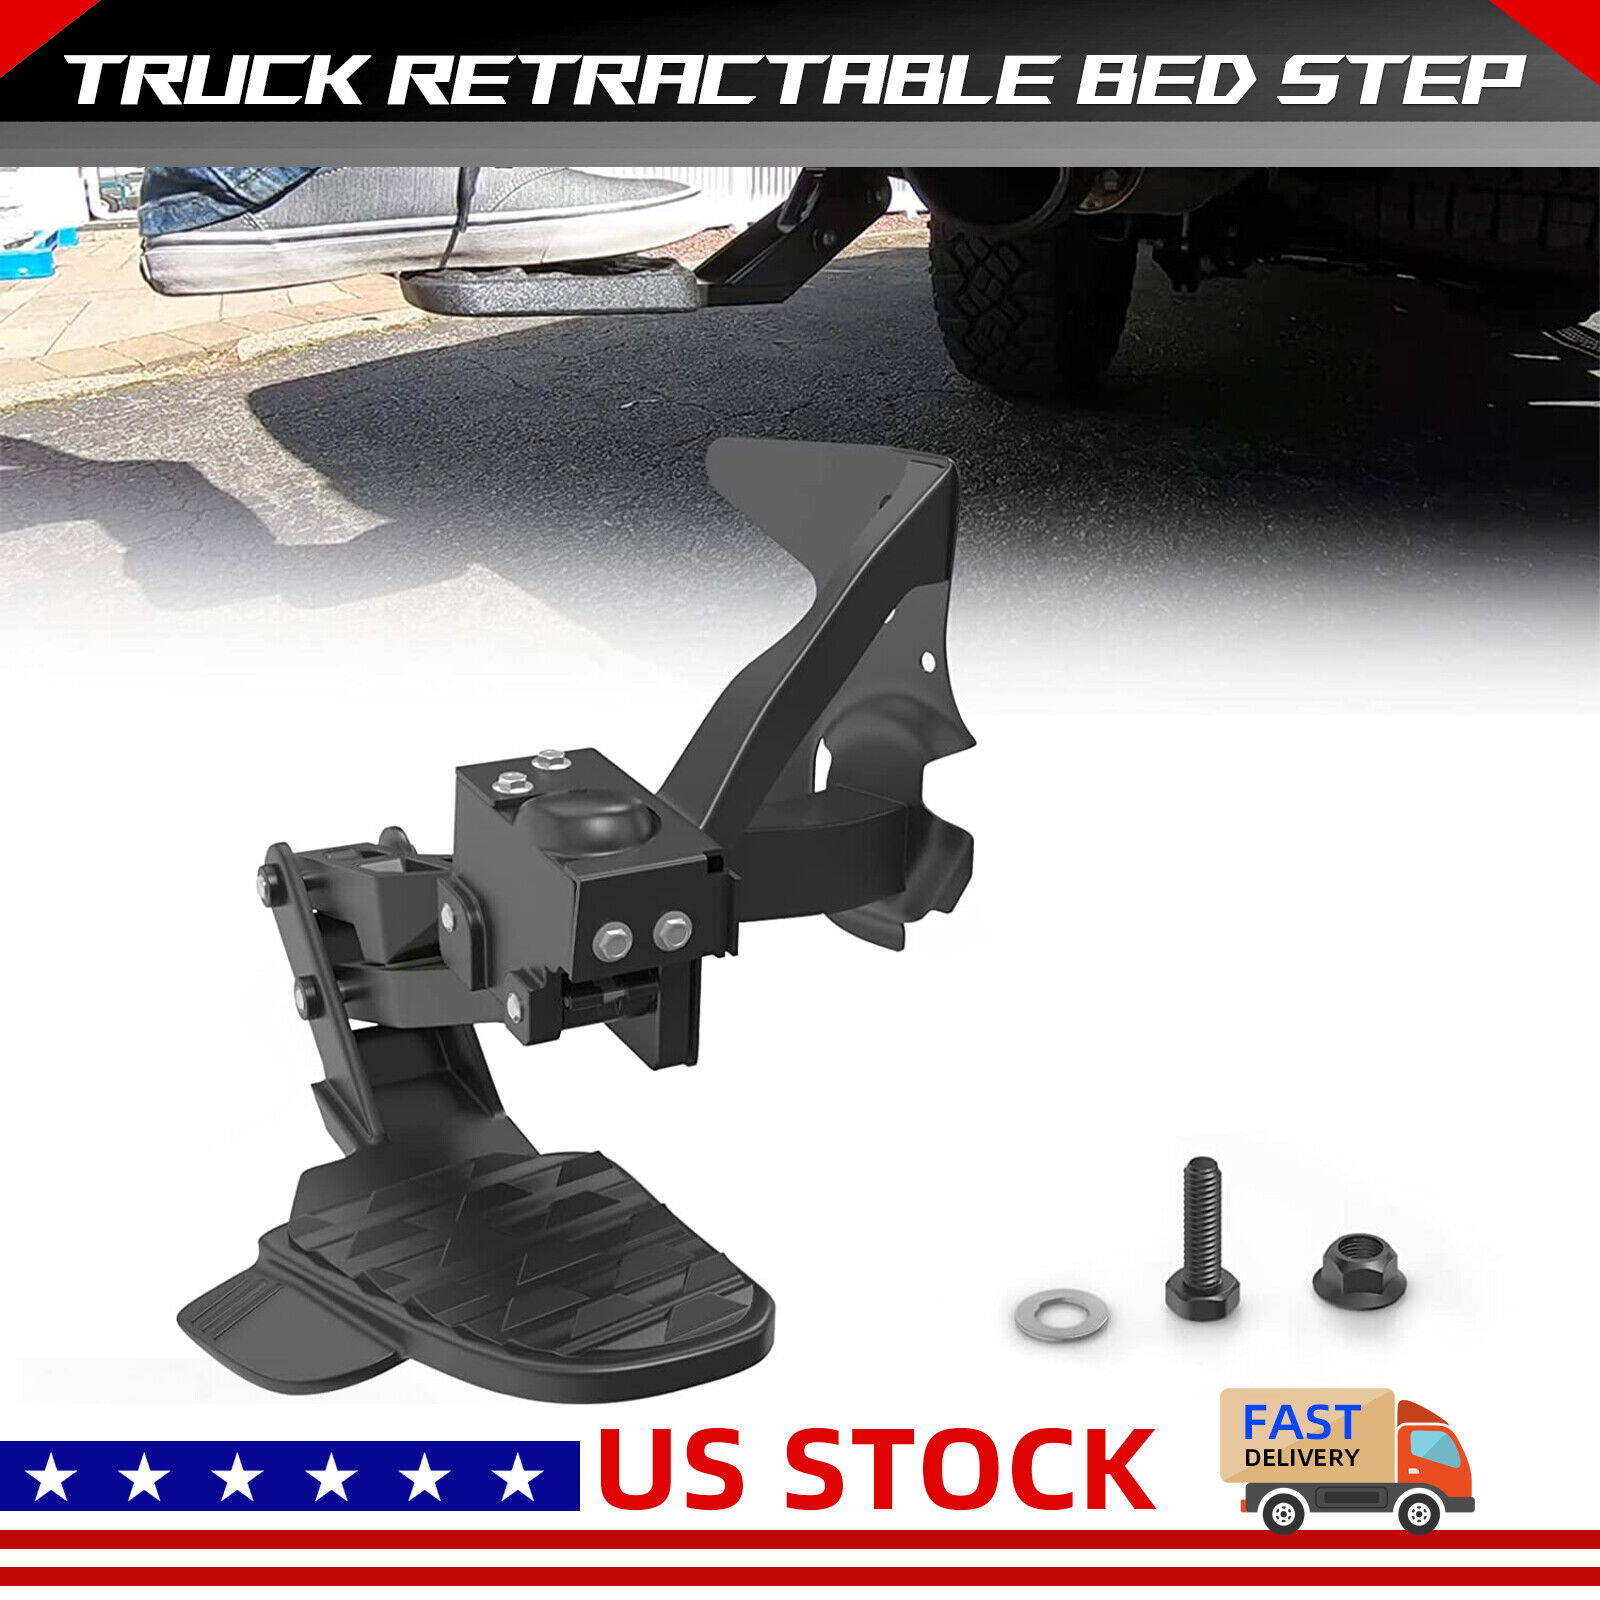 New Rear Bed Step For 2019 2020 2021 2022 2023 Ram 1500 DT Dual Exhaust Vehicles